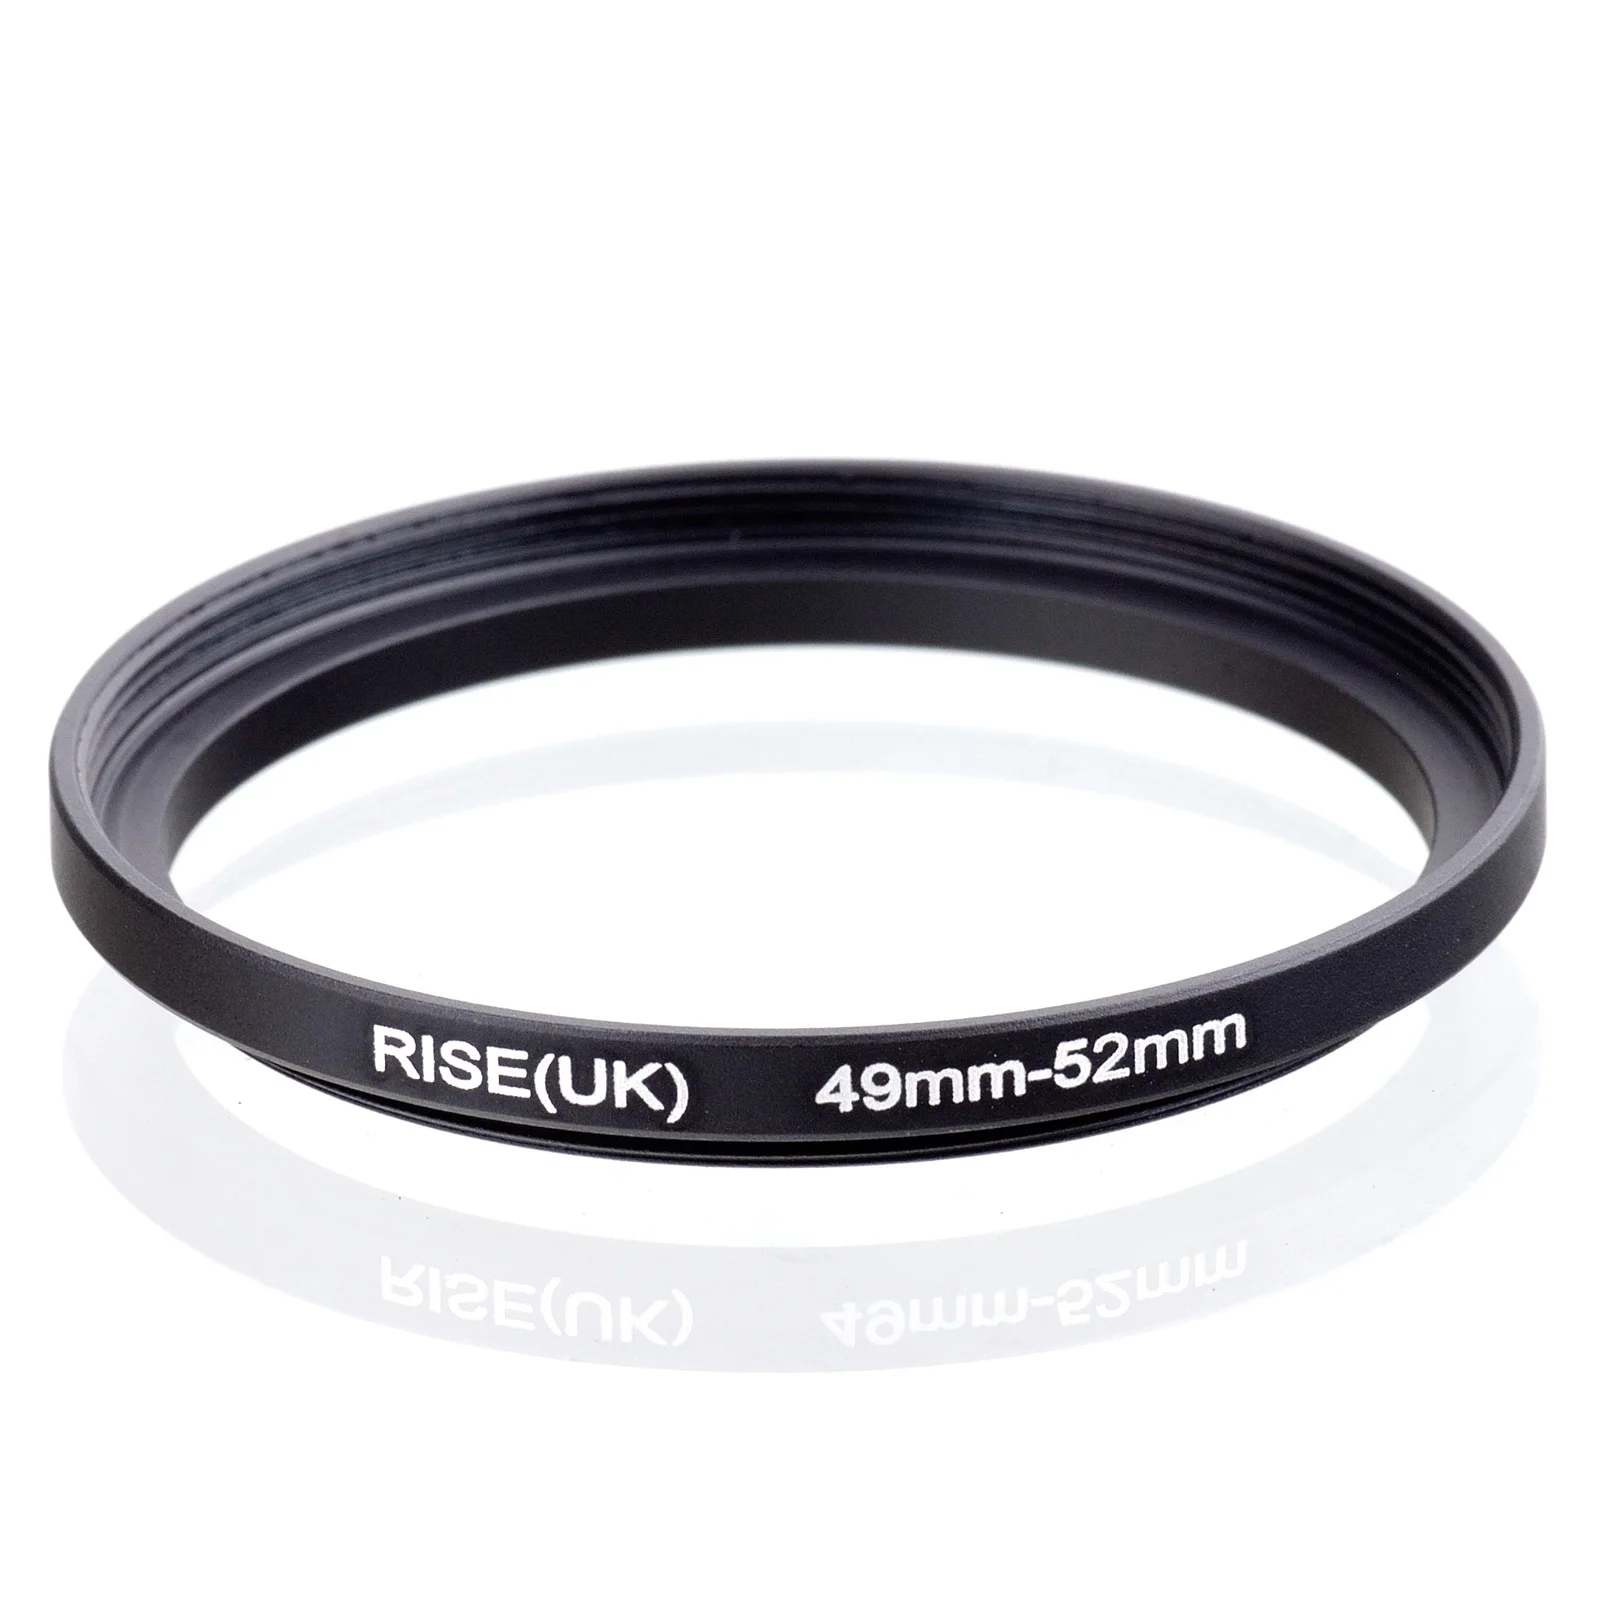 

RISE(UK) 49mm-52mm 49-52 mm 49 to 52 Step up Filter Ring Adapter